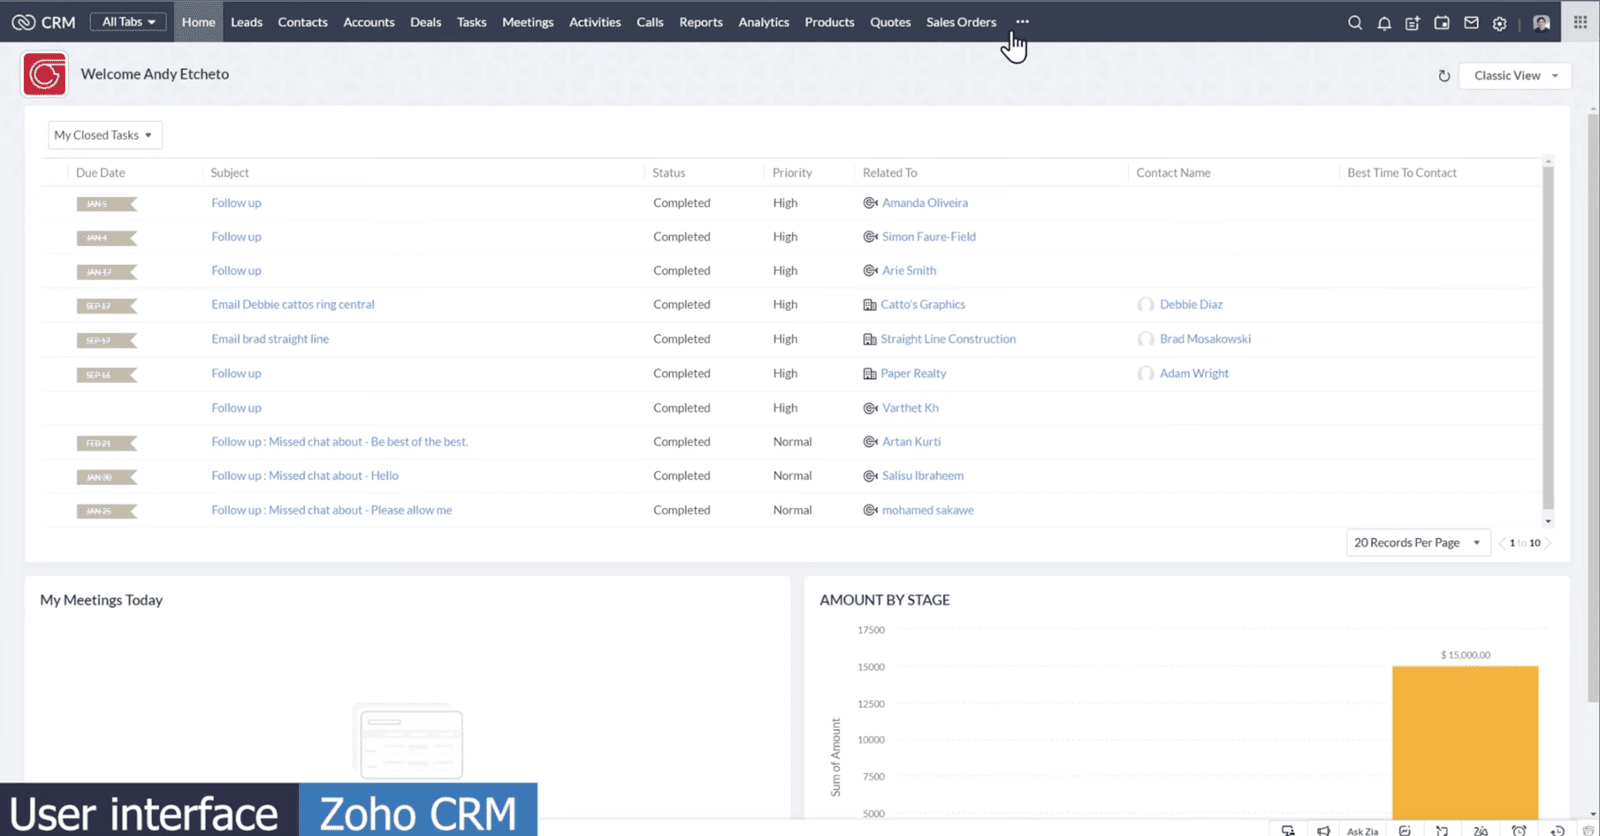 Zoho CRM user interface